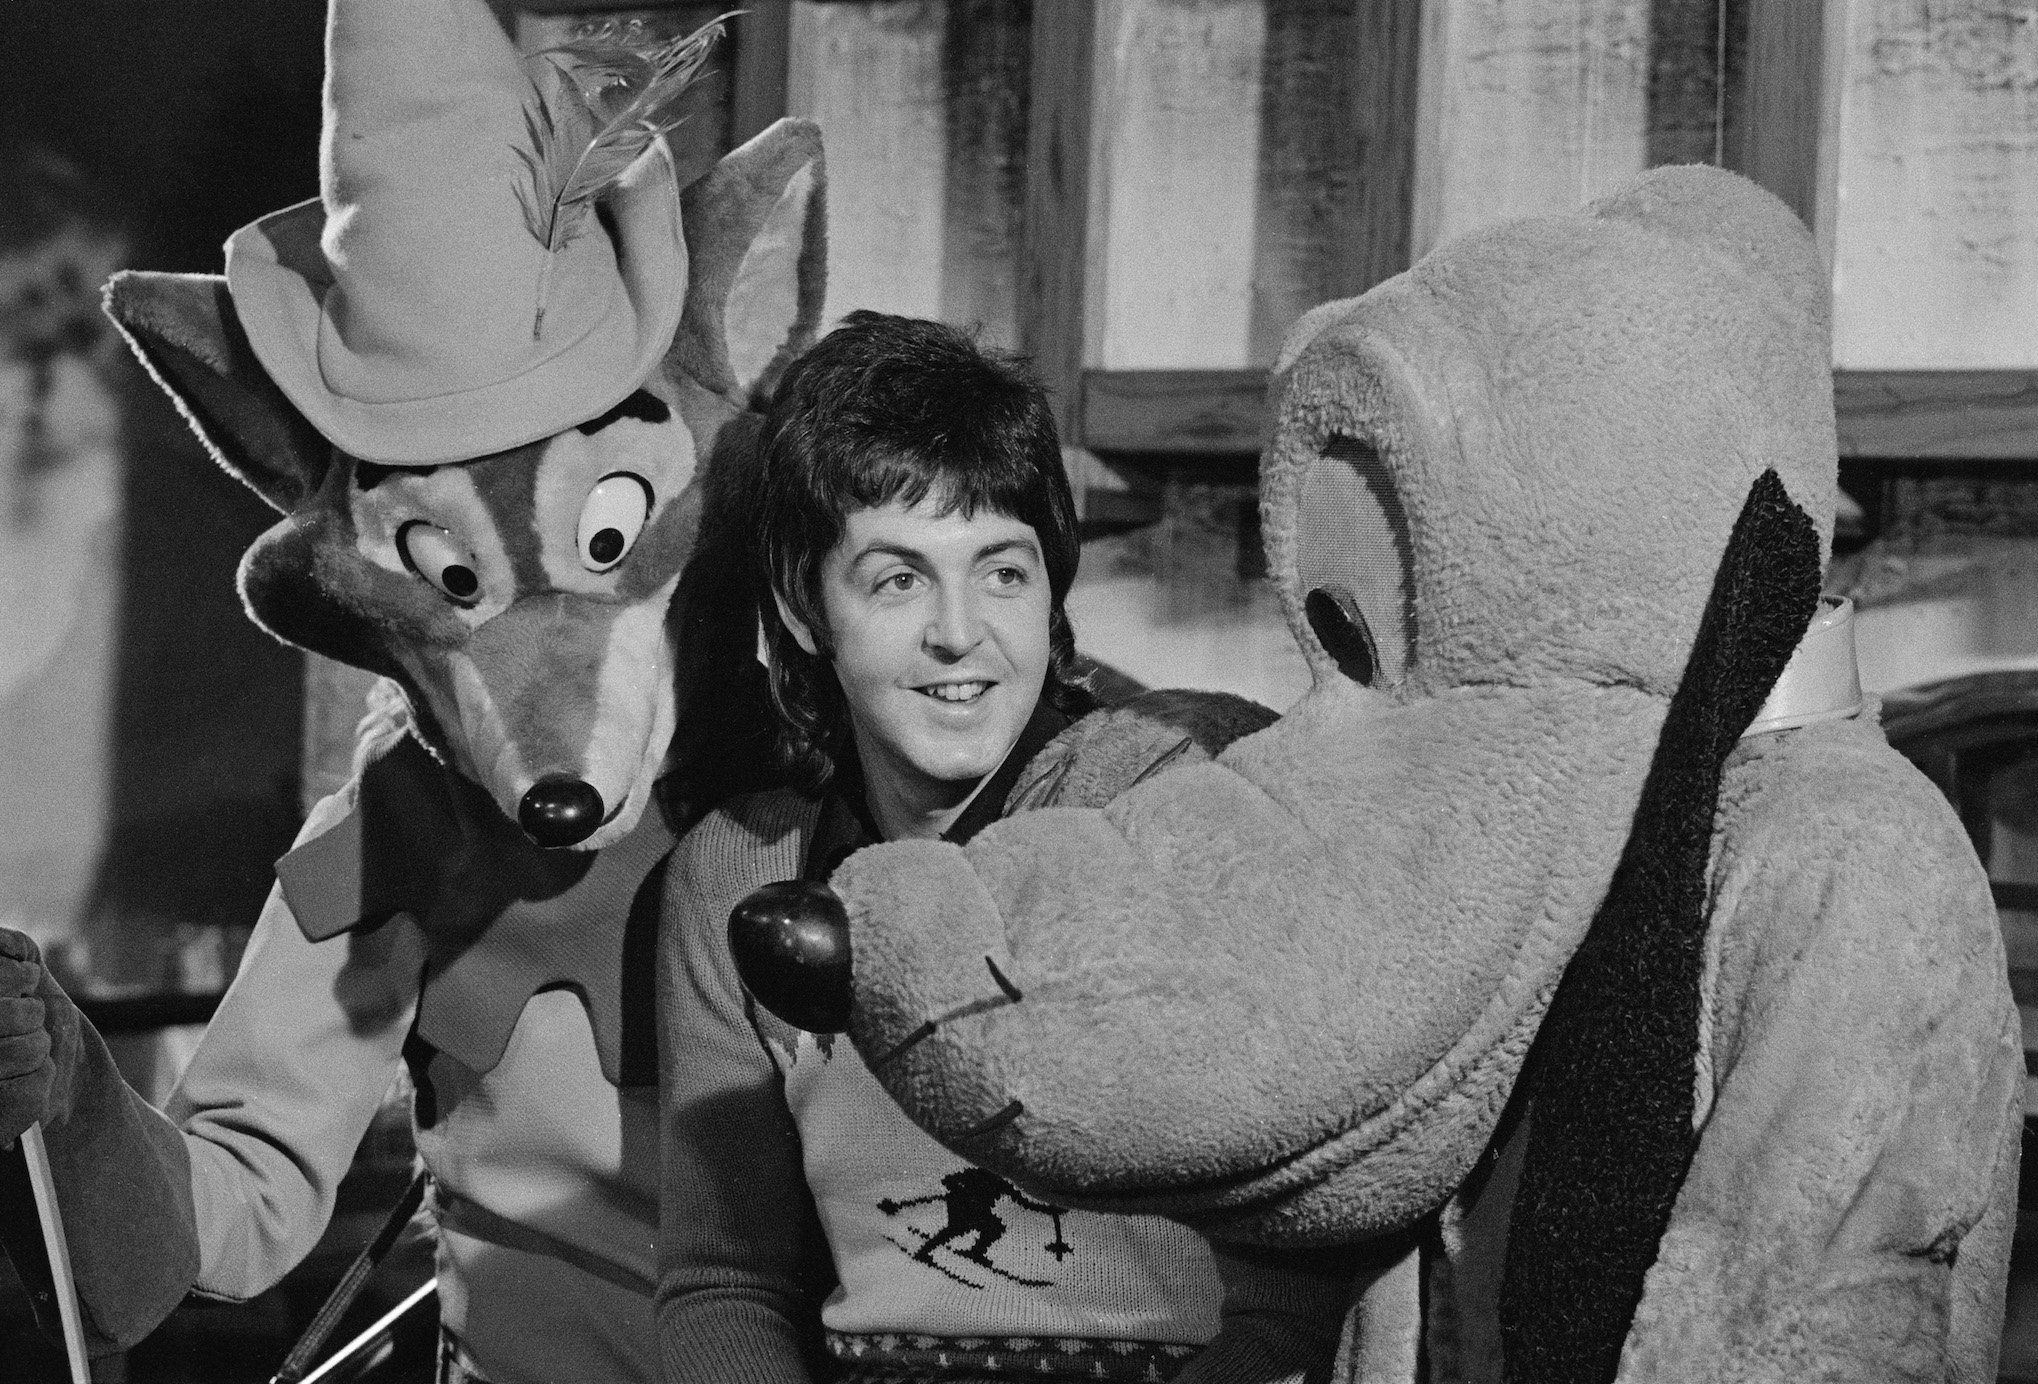 Paul McCartney poses with Disney characters Robin Hood and Pluto in 1973